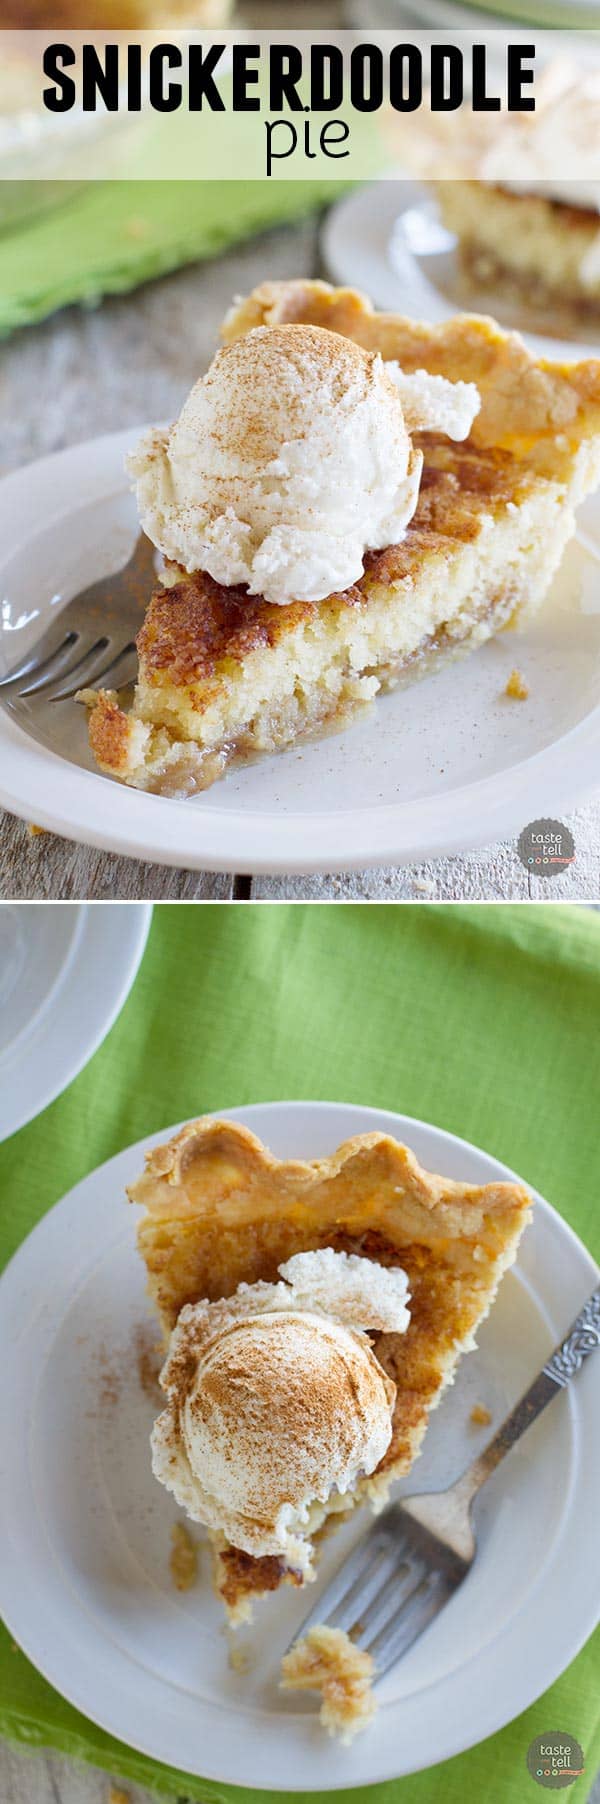 Pie meets snickerdoodle cookie in this addictive Snickerdoodle Pie.  A pie crust is topped with a soft snickerdoodle cookie center and a cinnamon caramel sauce.  Serve with ice cream for a delicious dessert!